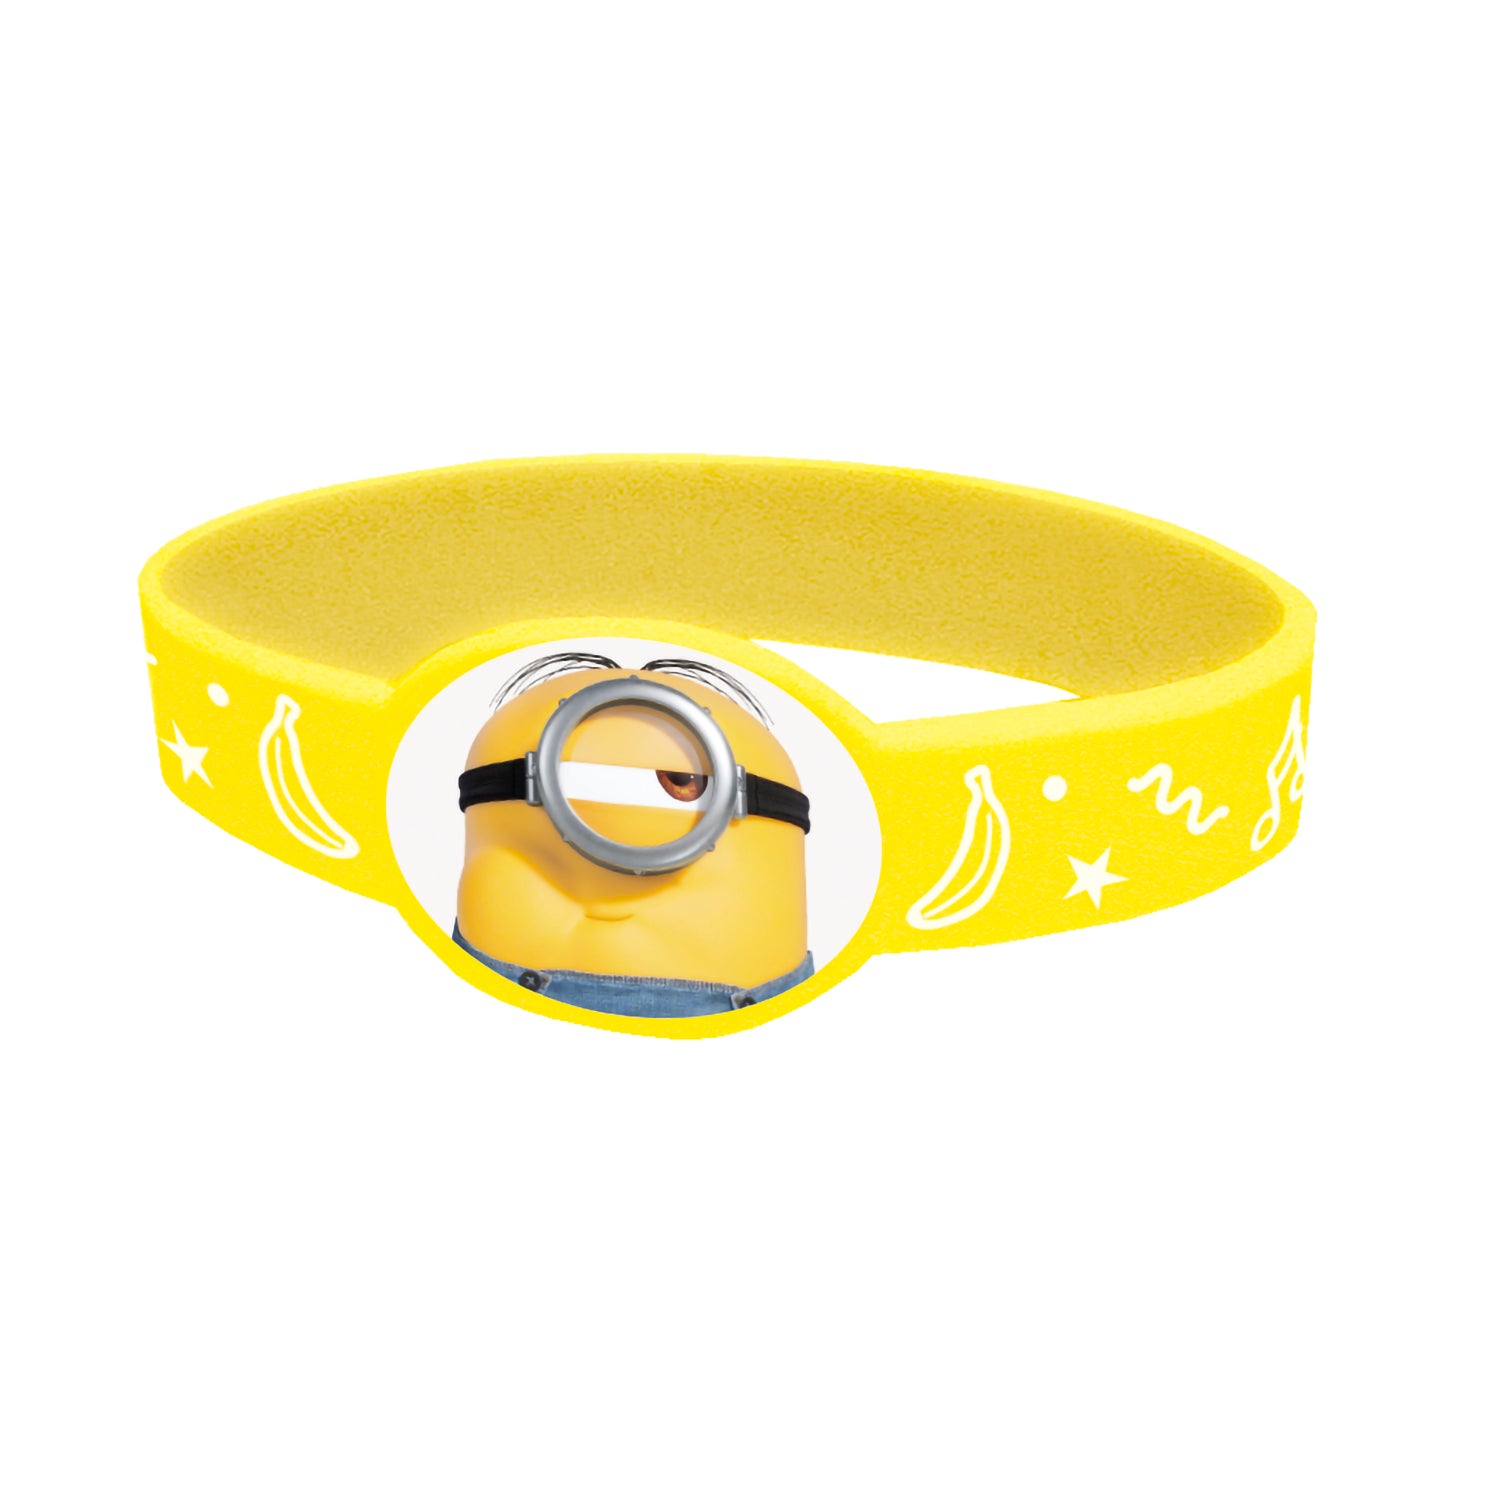 Minions Rise of Gru Party Favor Stretch Bracelets - Pack of 4